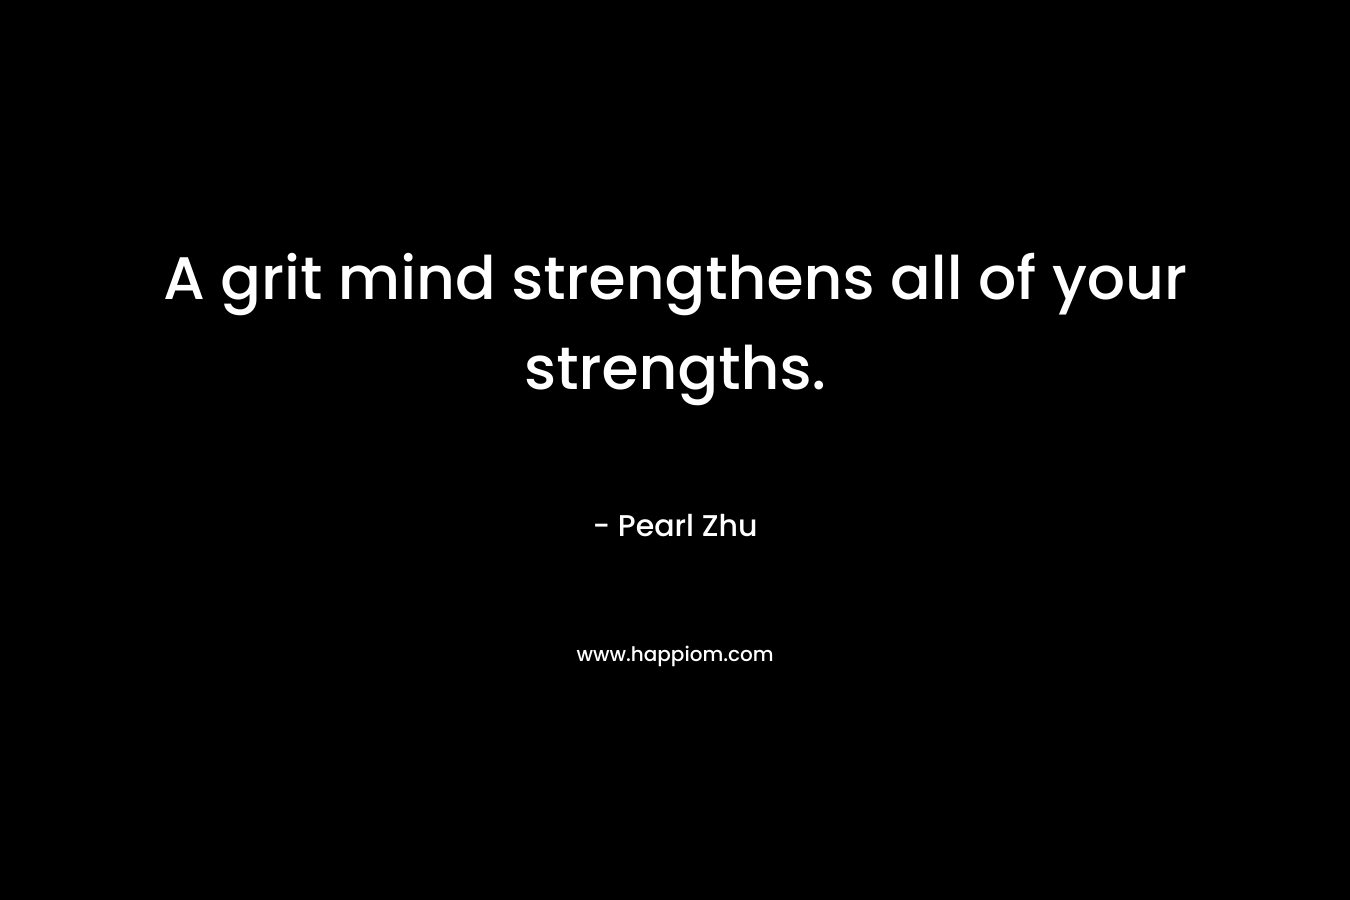 A grit mind strengthens all of your strengths.